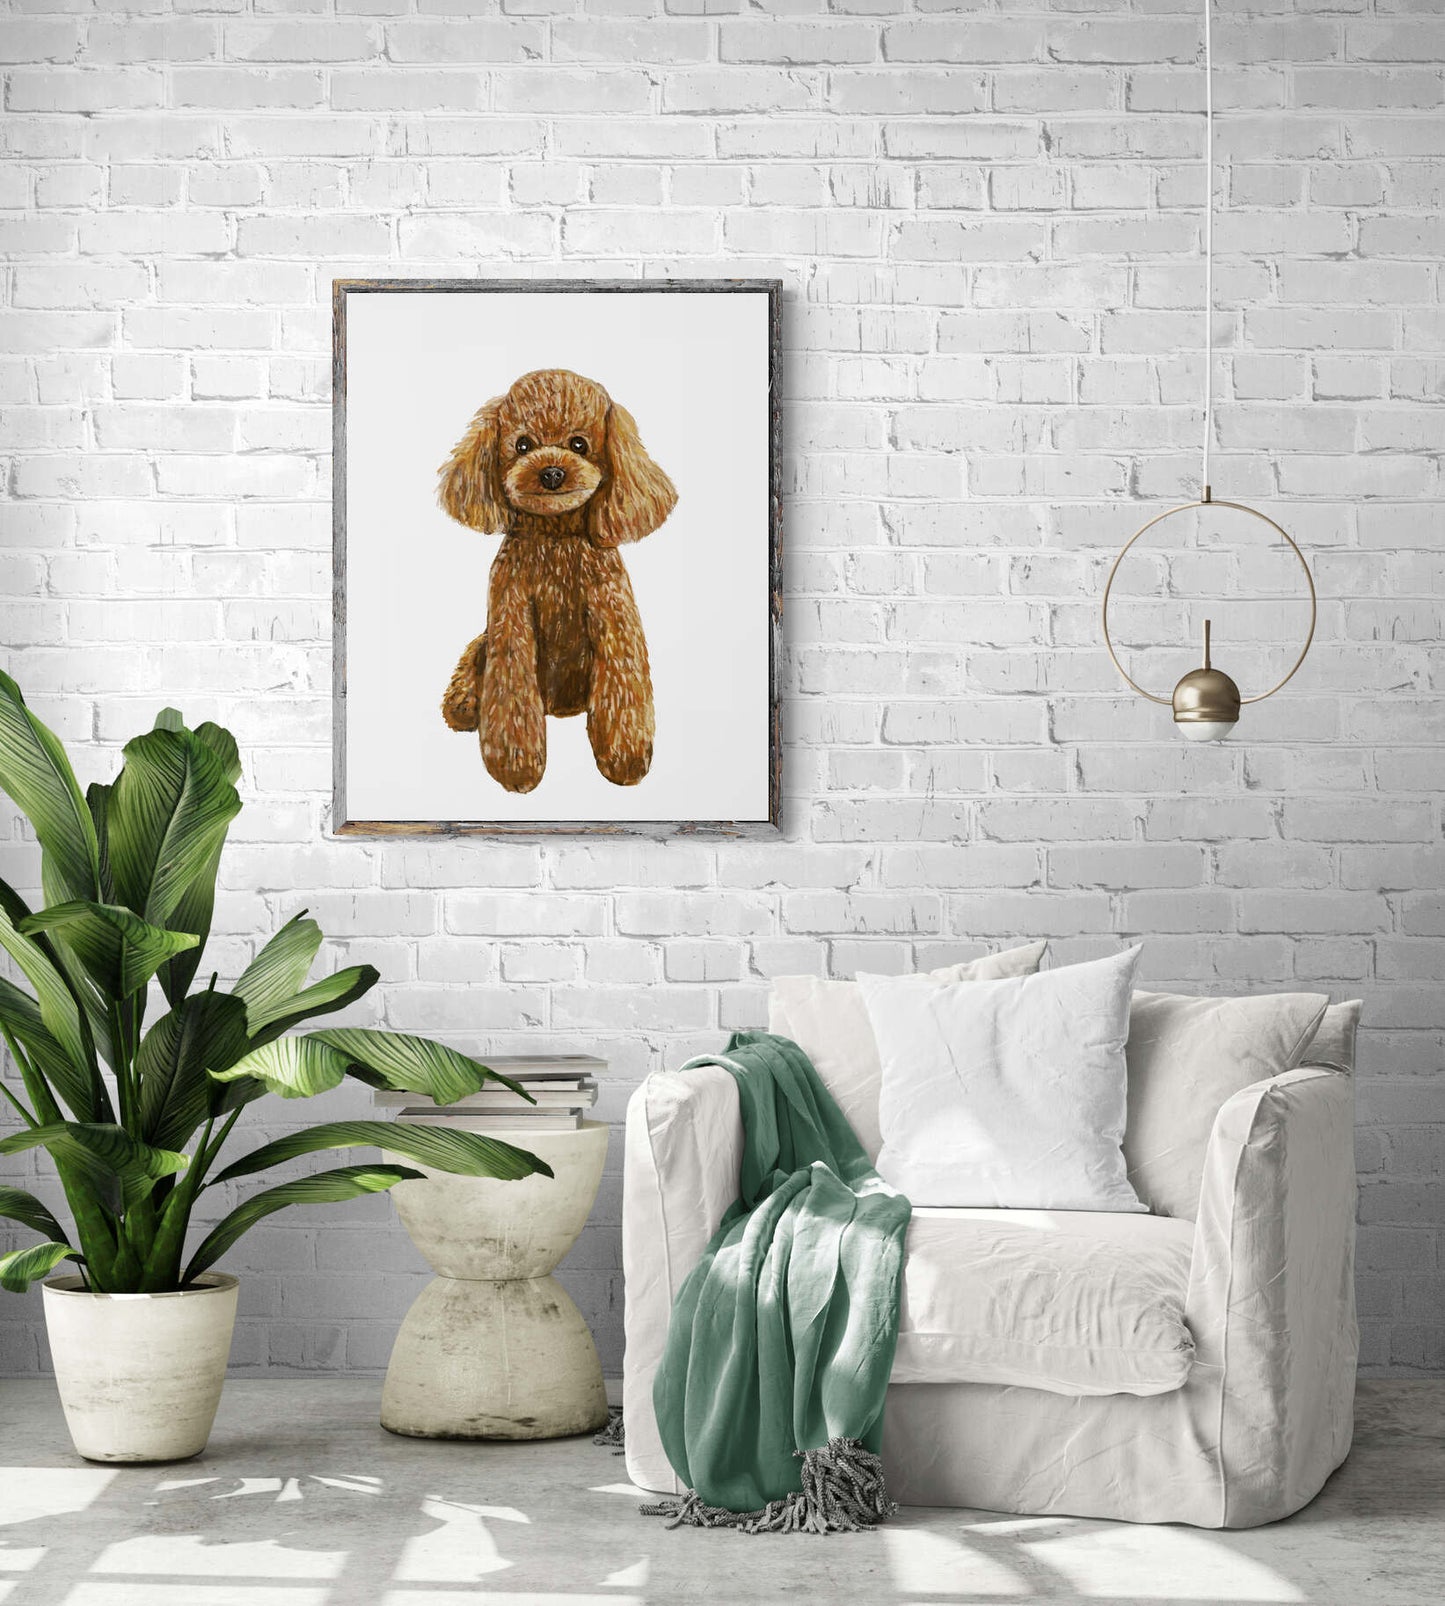 Cute Poodle Print, Poodle Portrait, Doggy Artwork, Brown Poodle Painting, Living Room Wall Art, Bedroom Wall Print, Puppy Home Decor